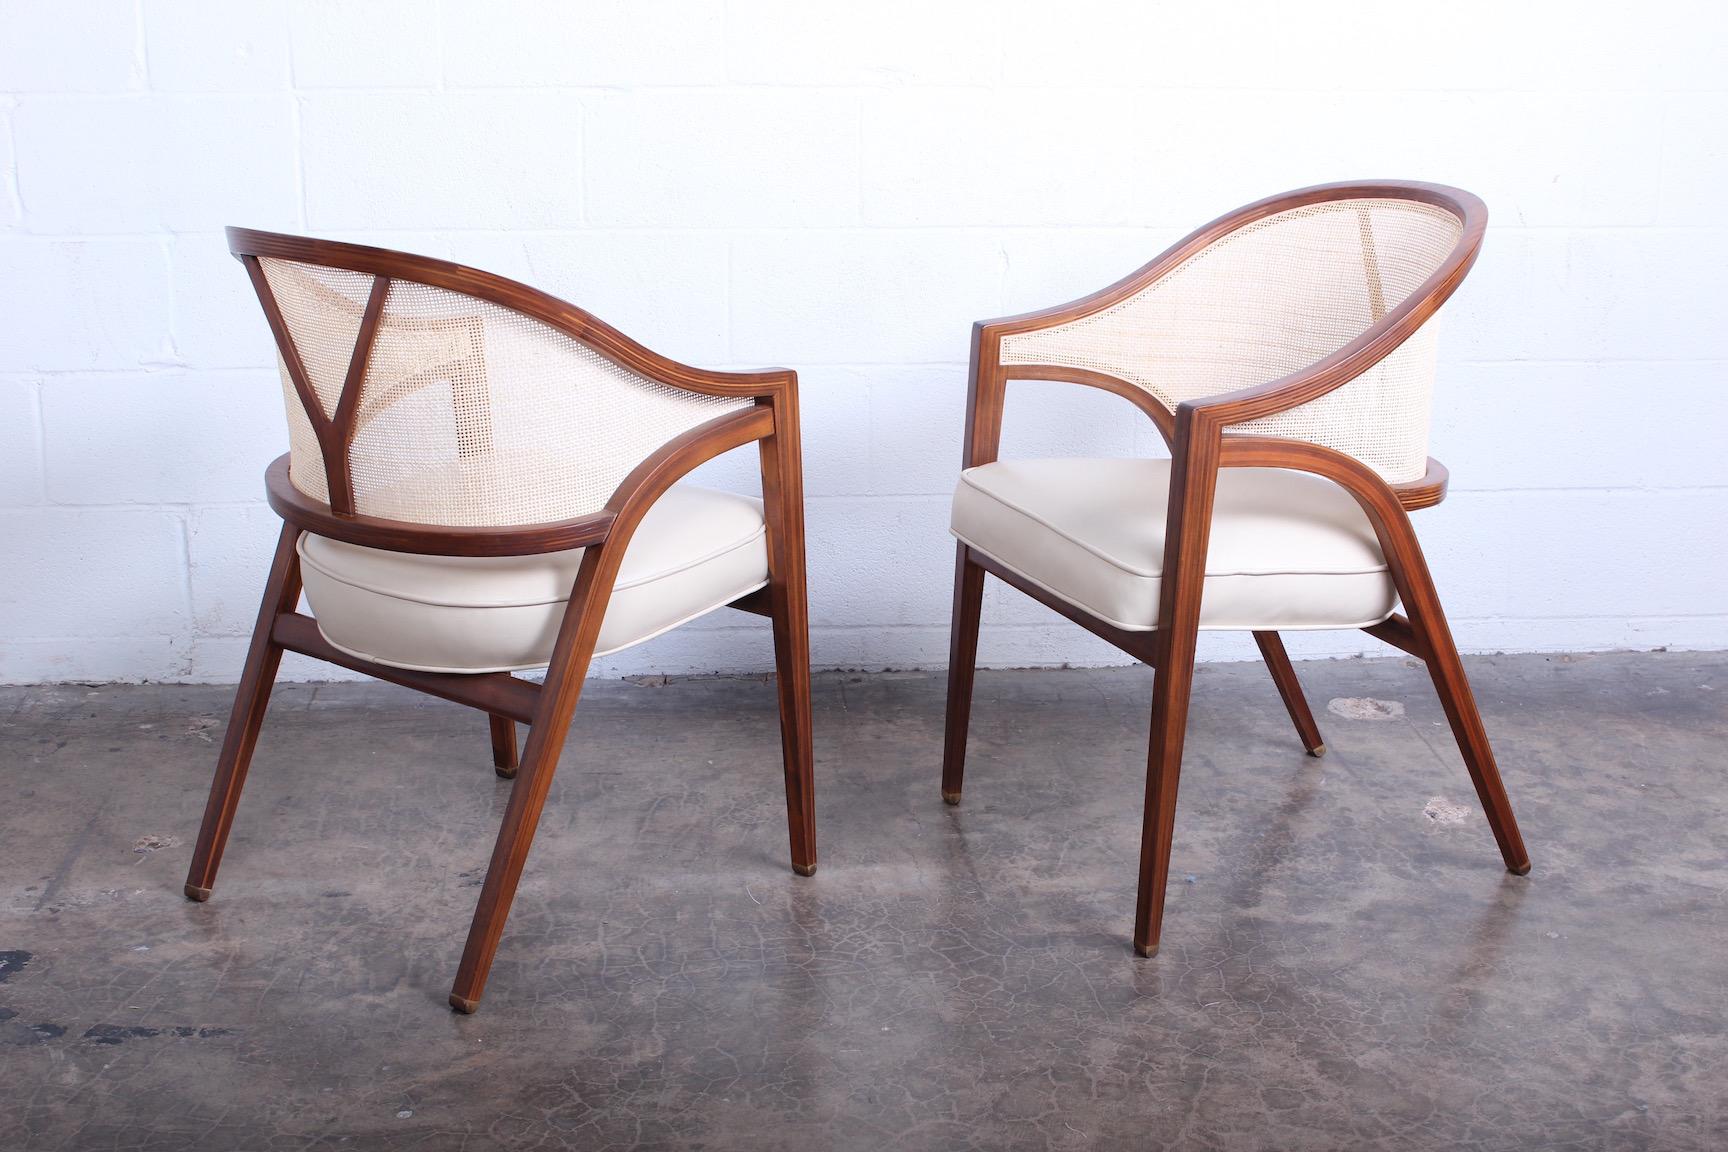 A pair of cane back armchairs designed by Edward Wormley. Walnut with original leather seats. Two pairs available.